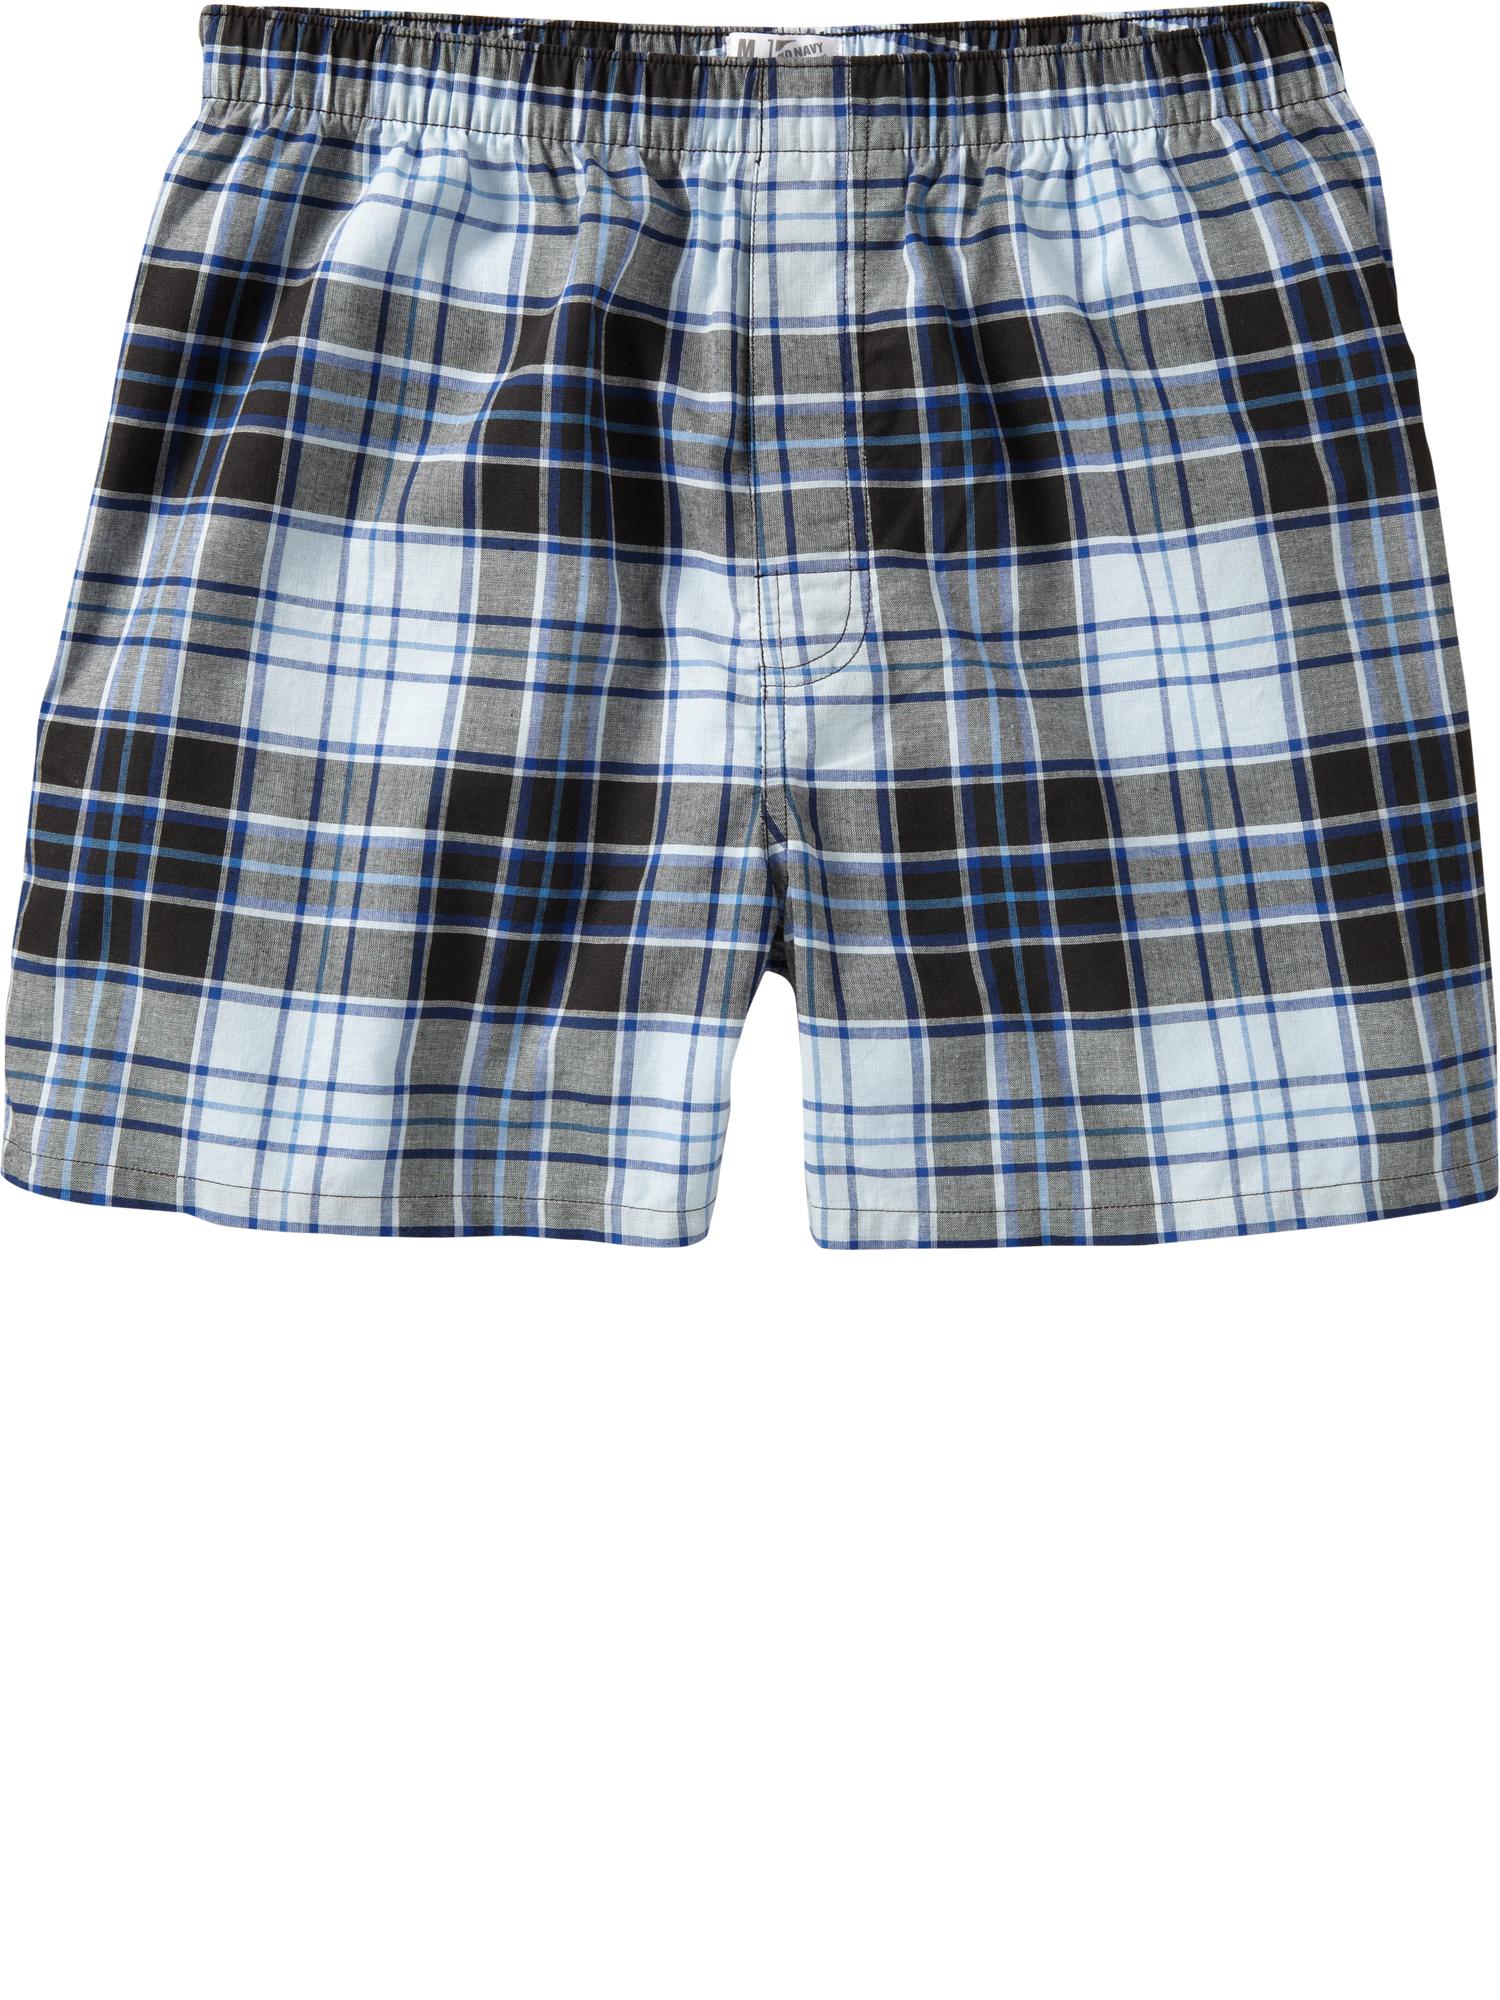 Men's Patterned Boxers | Old Navy